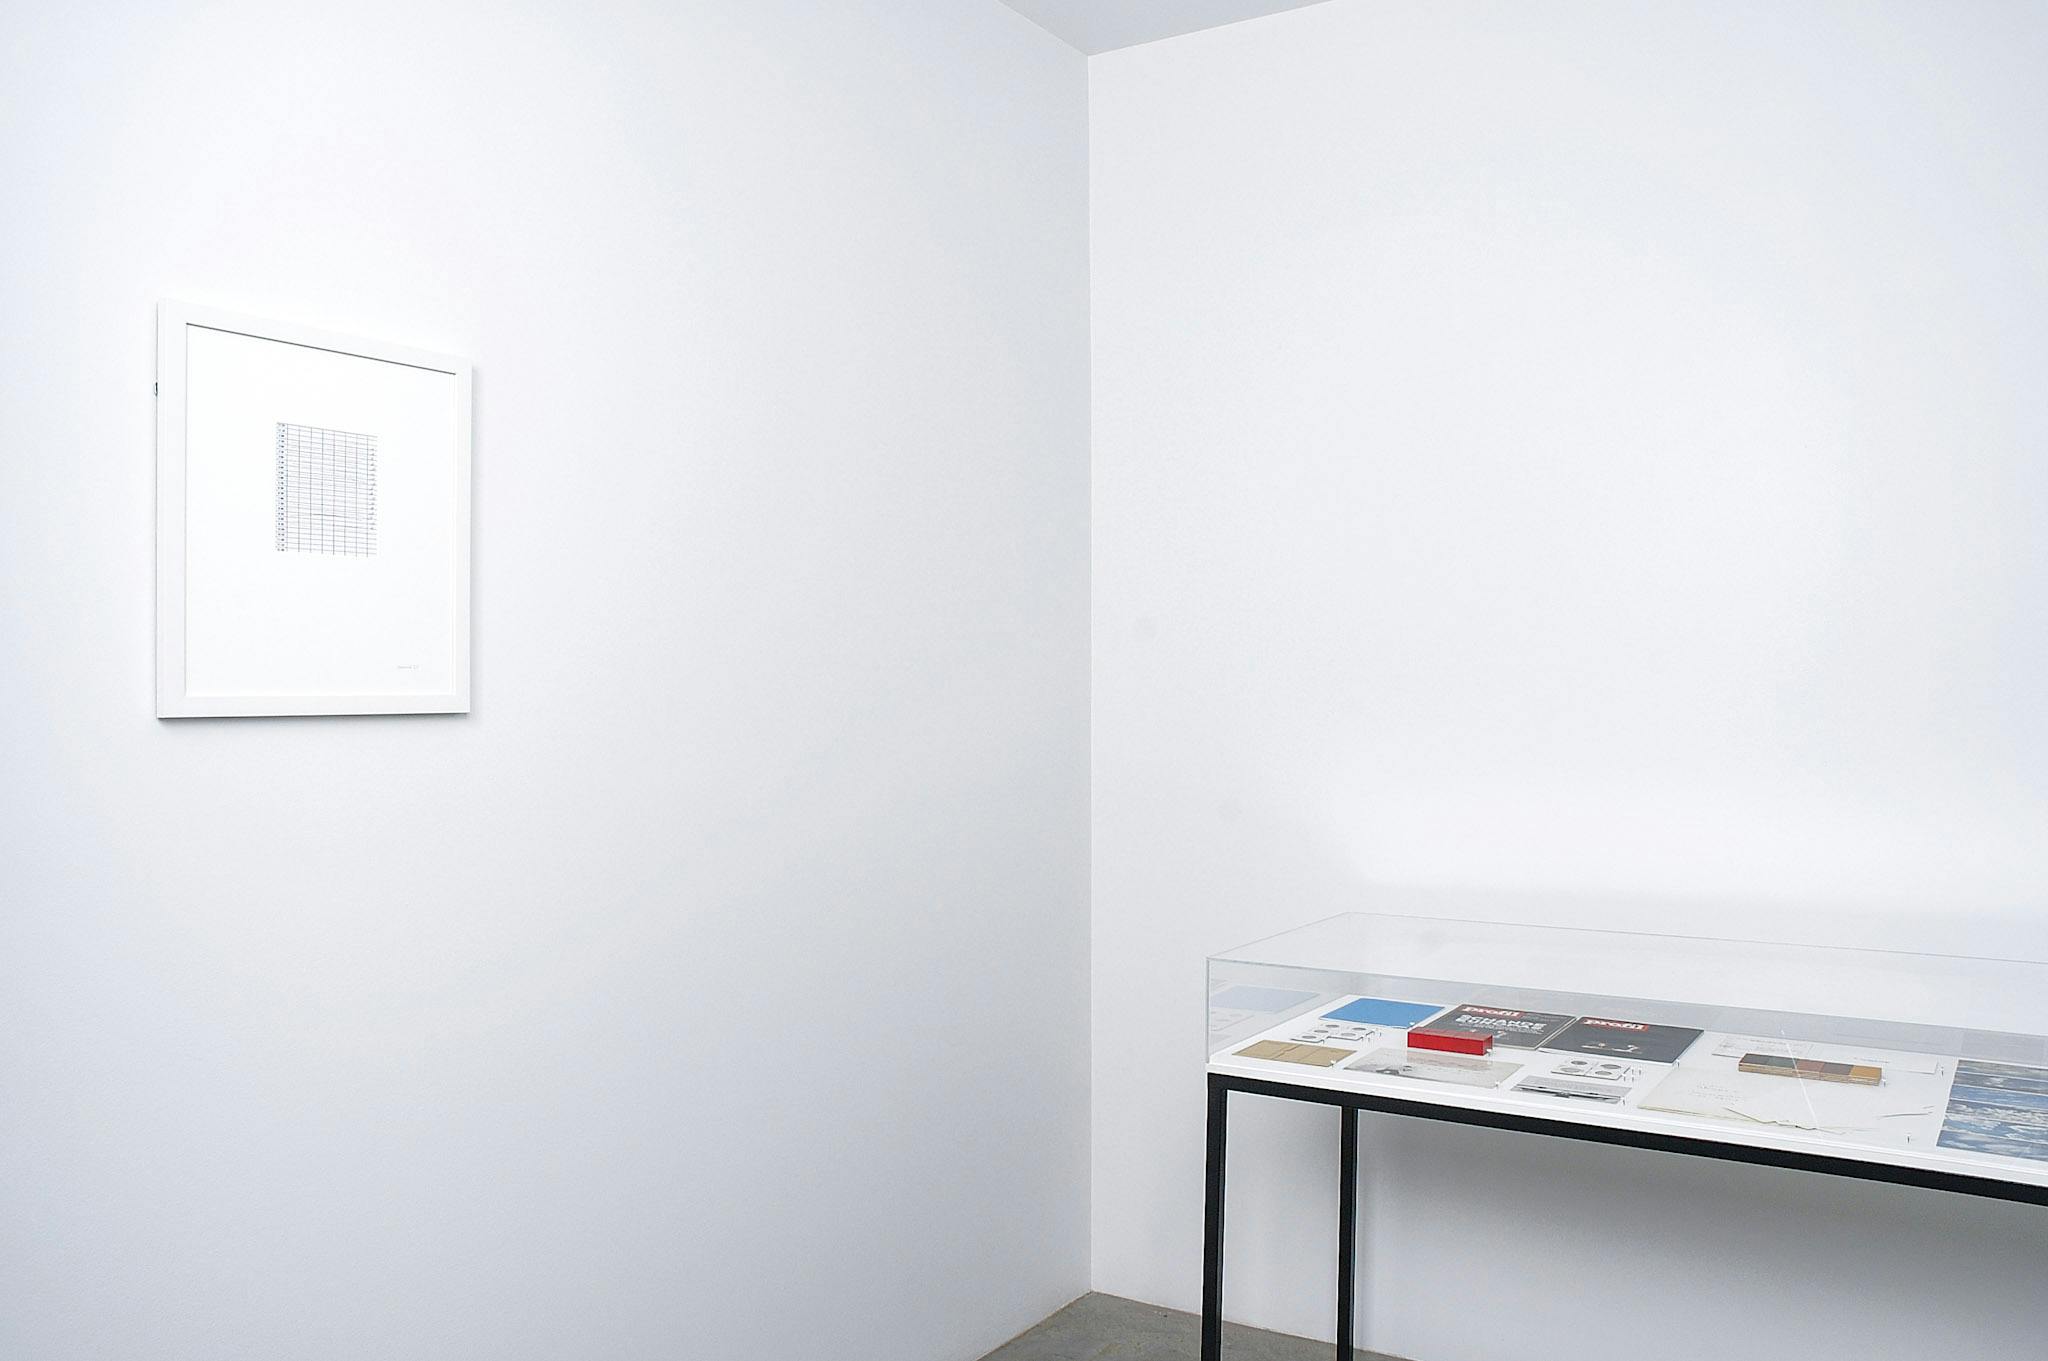 An installation image of artworks by Micah Lexier. A variety of objects such as postcards and magazines are placed in a display case. A drawing that looks like a graph is mounted on a wall.